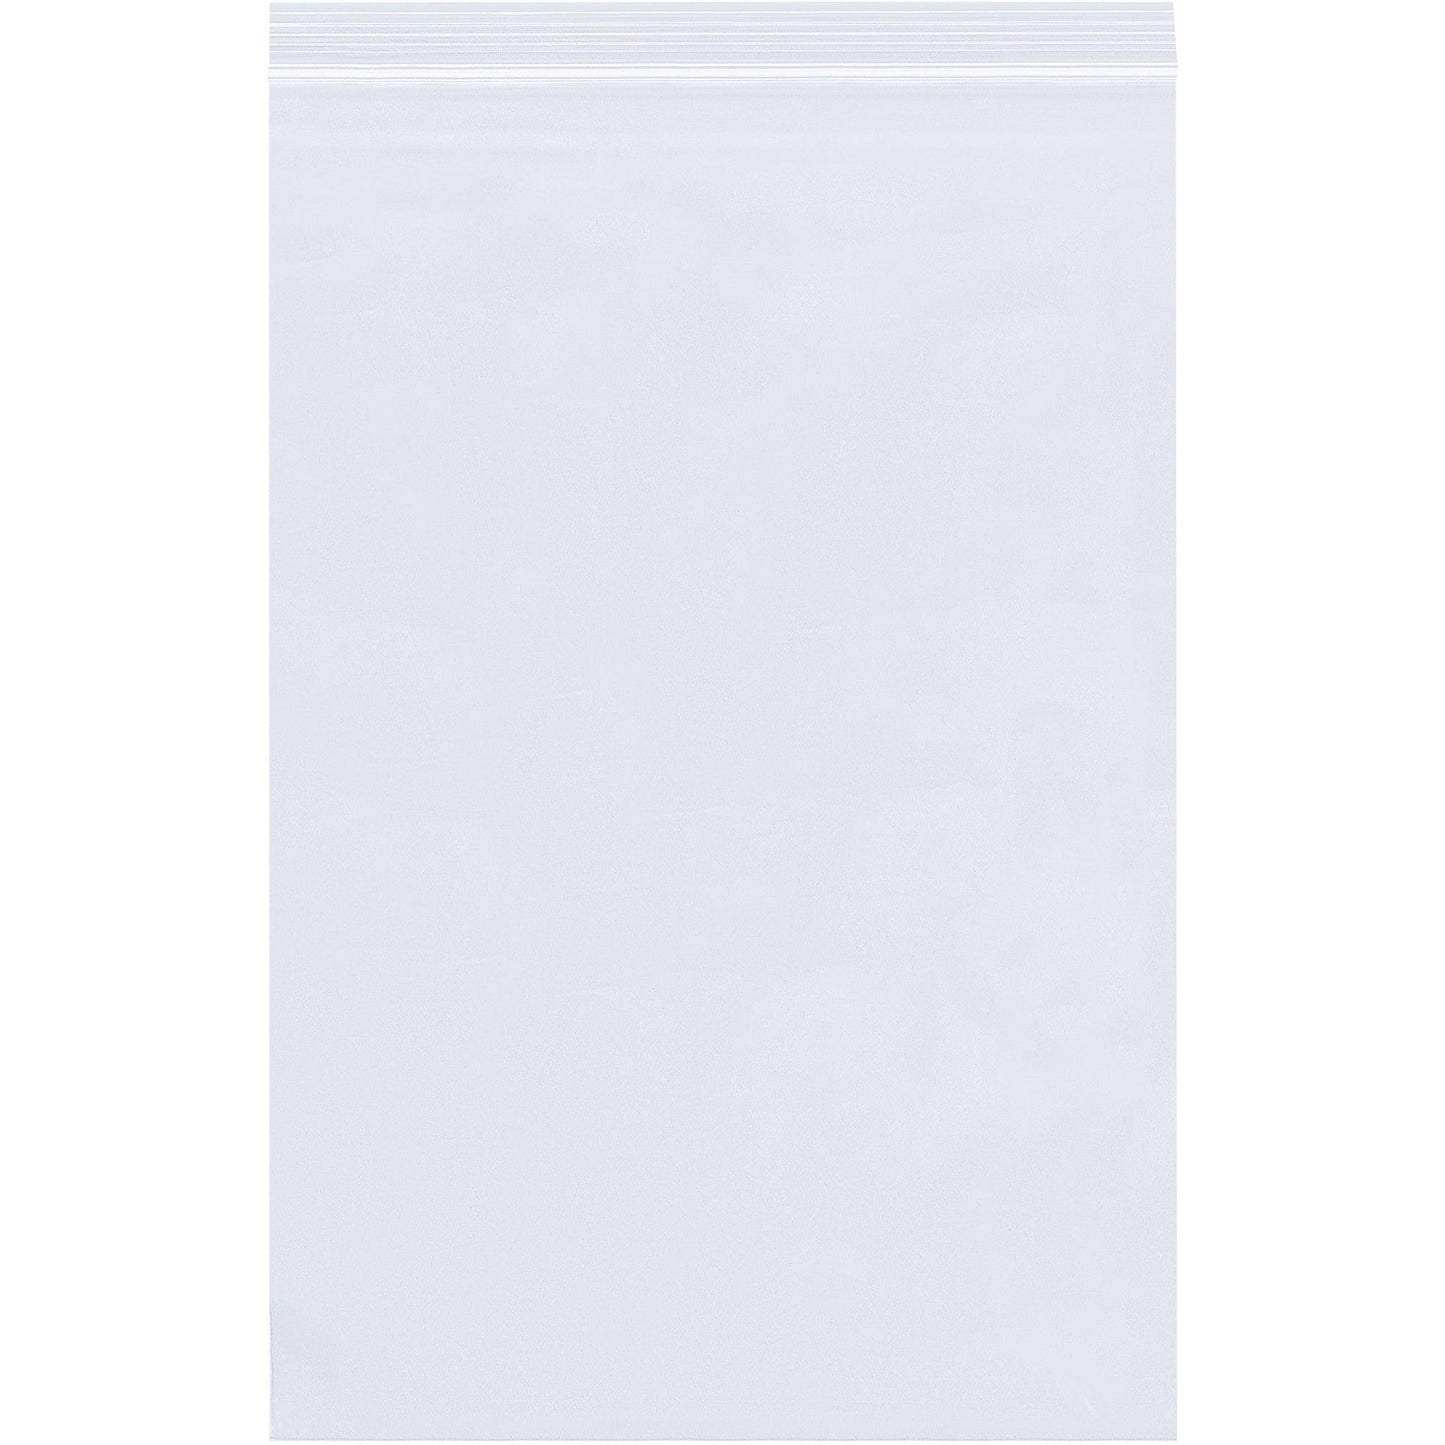 6 x 9" - 6 Mil Reclosable Poly Bags - PB3873